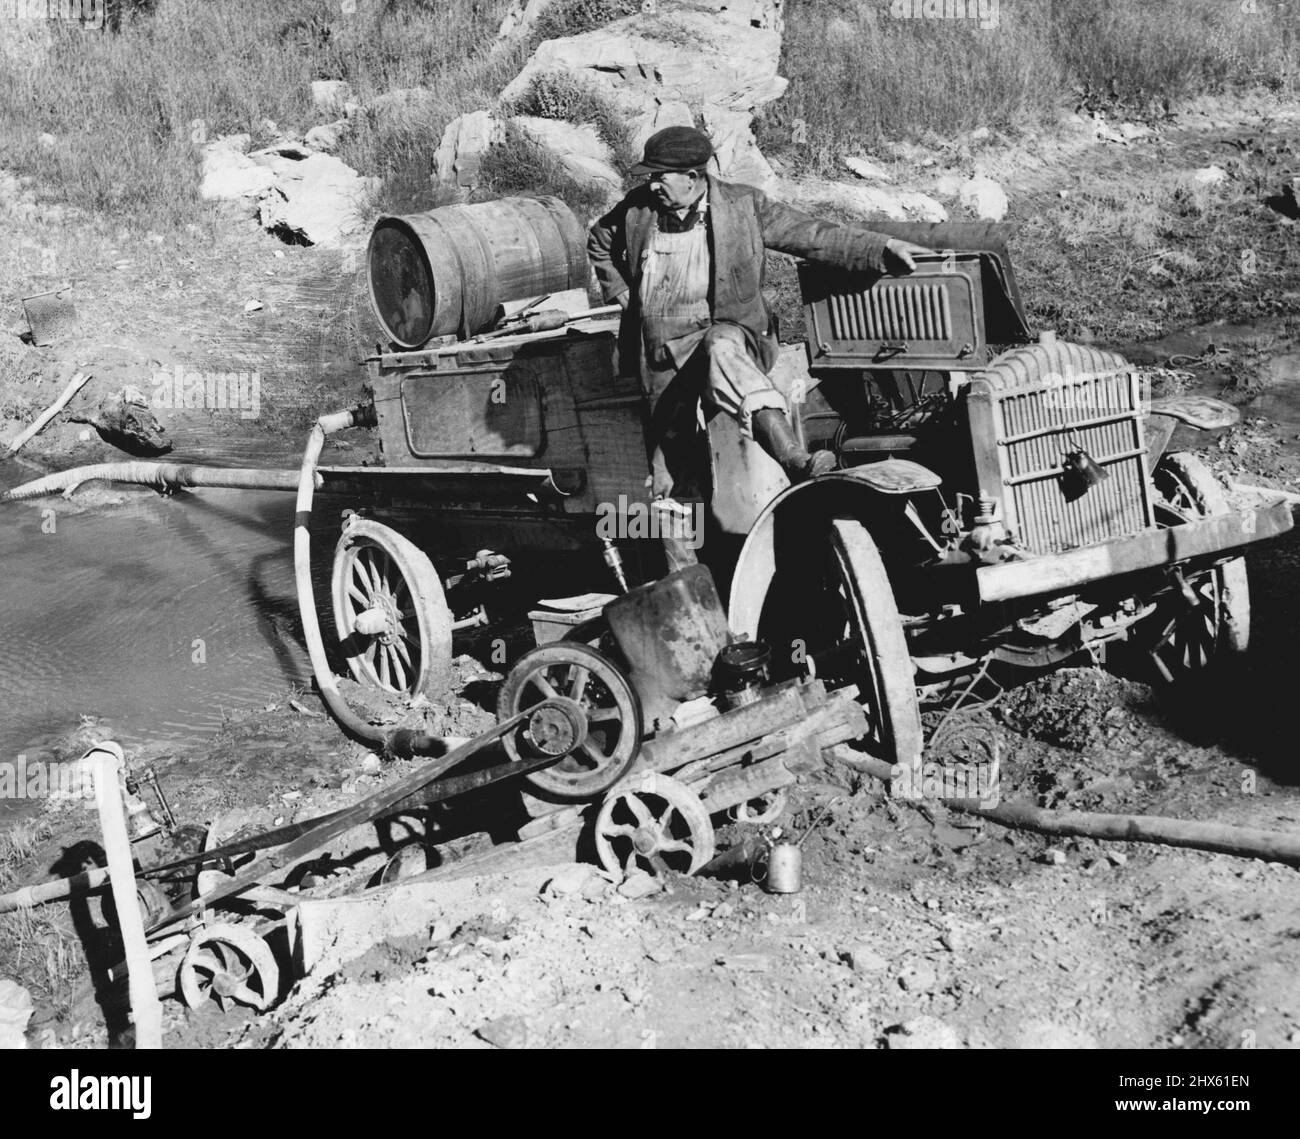 Emptying Quarry. This ancient fire engine is pumping water out of a quarry in the Portland district in the search for two missing boys. Mr. Albert Dooley Gough, 58, will run the engine until the quarry is dry. The missing boys are John Ward, 8, and Albert Spiers 7. November 4, 1950.;Emptying Quarry. This ancient fire engine is pumping water out of a quarry in the Portland district in the search for two missing boys. Mr. Albert Dooley Gough, 58, will run the engine until the quarry is dry. The mi Stock Photo